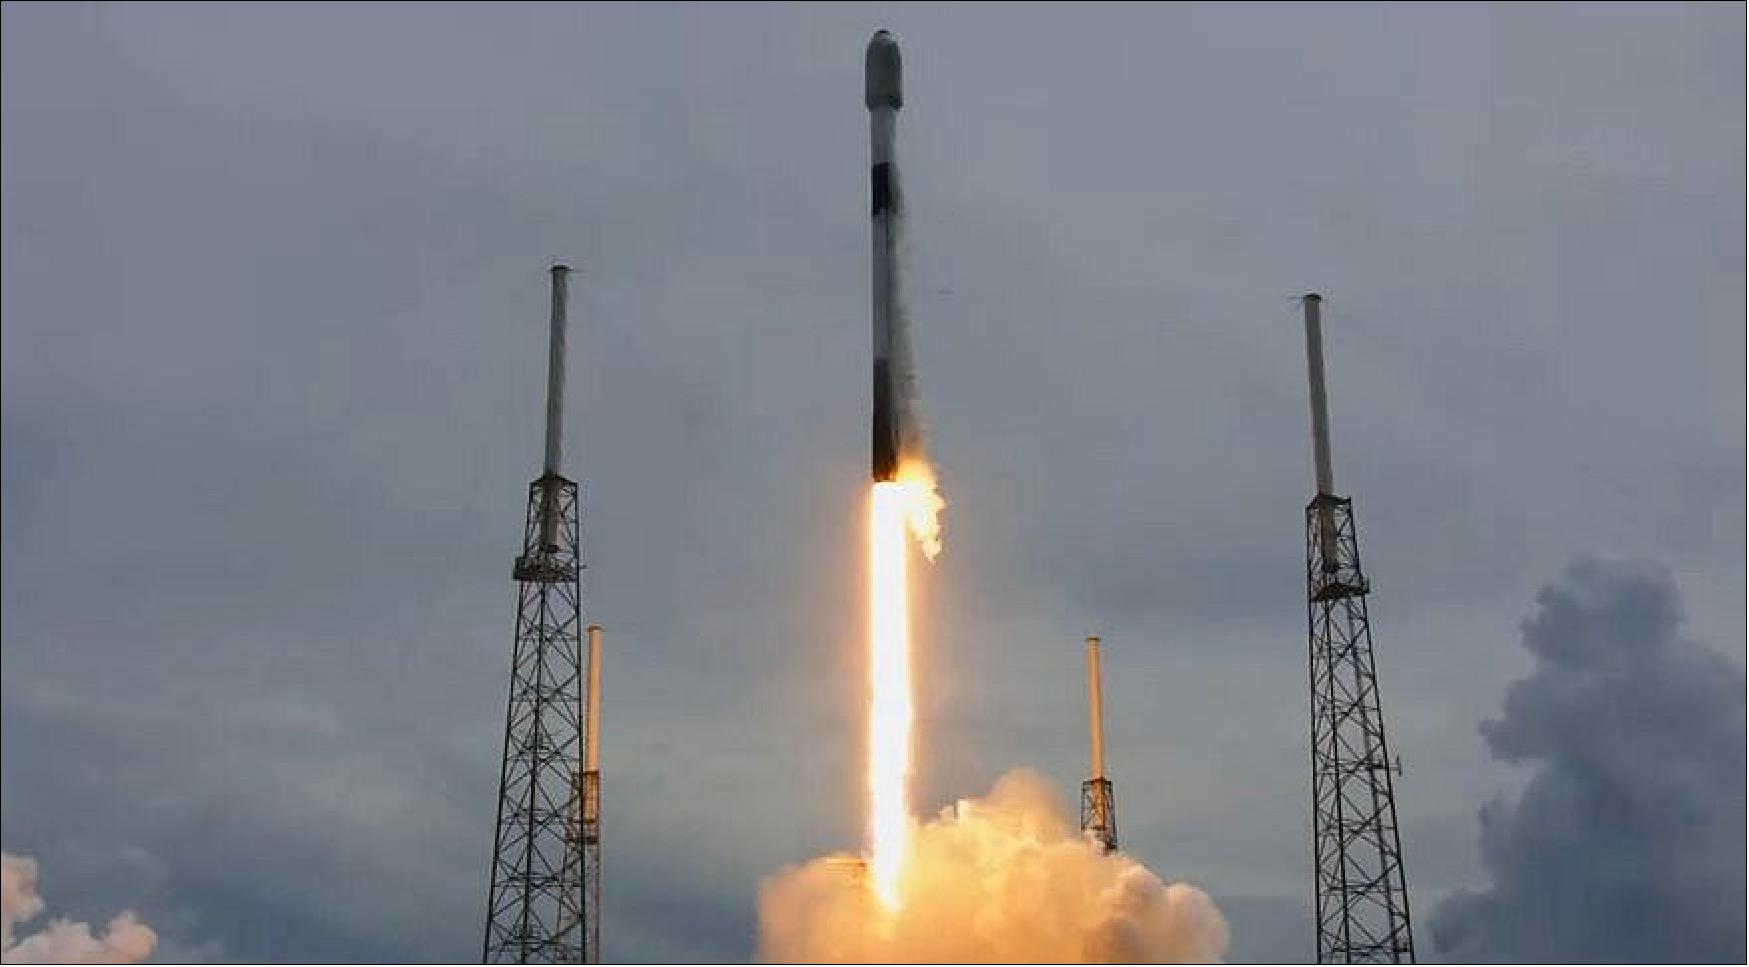 Figure 1: A SpaceX Falcon 9 lifts off June 30 on the Transporter-2 rideshare mission, with 88 satellites on board (image credit: SpaceX webcast)